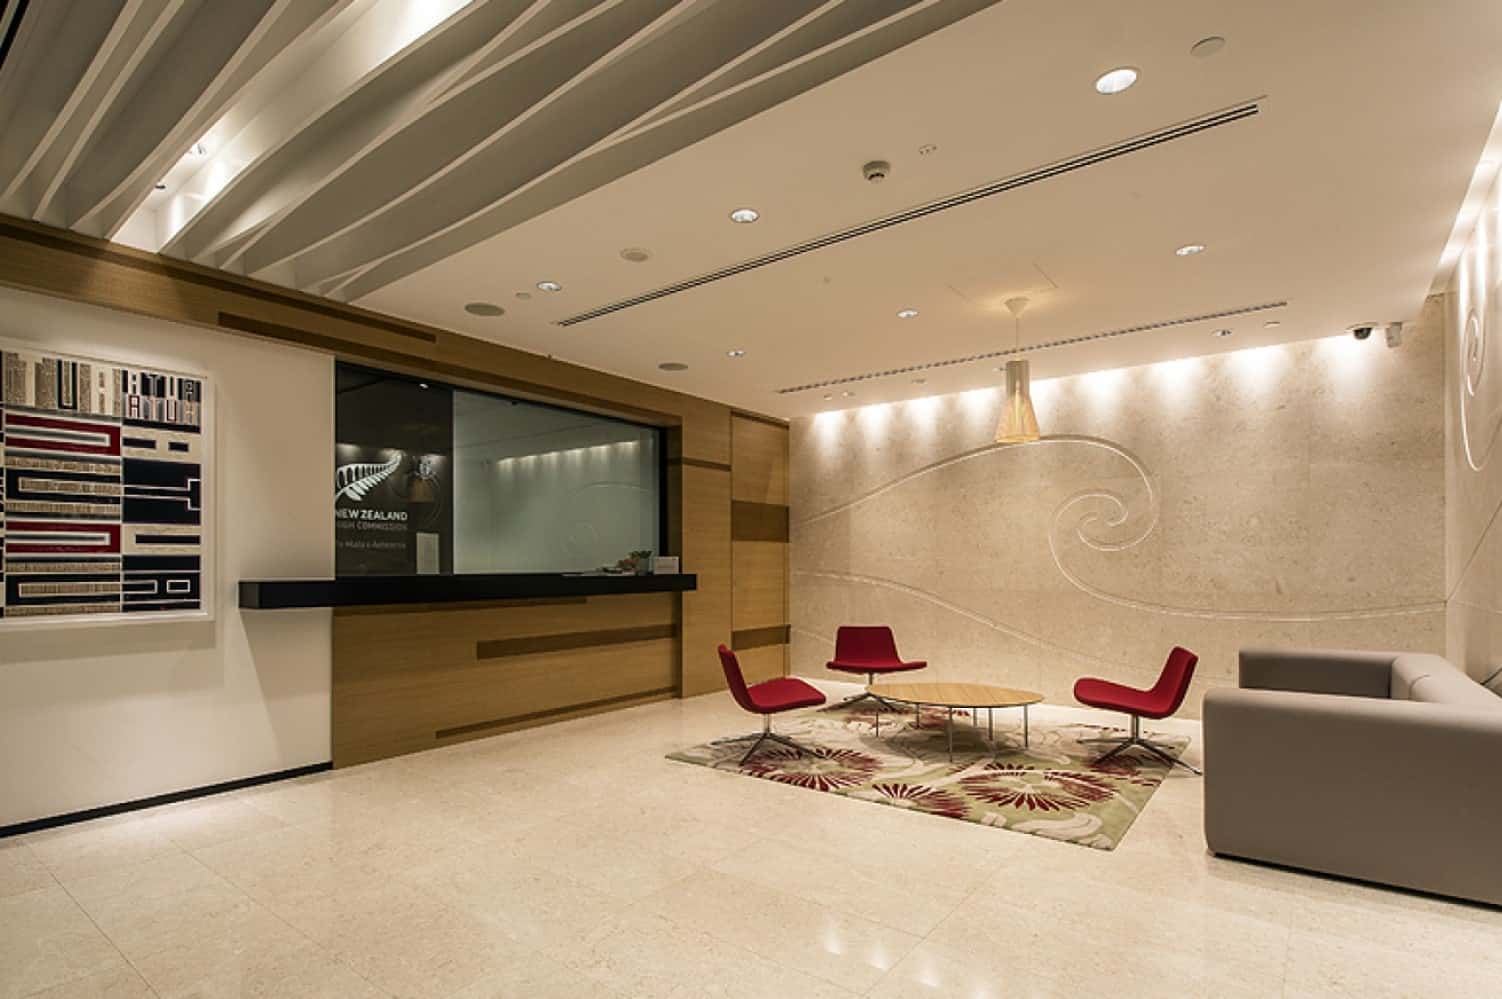 Ministry of Foreign Affairs and Trade office Singapore workplace reception with waiting area